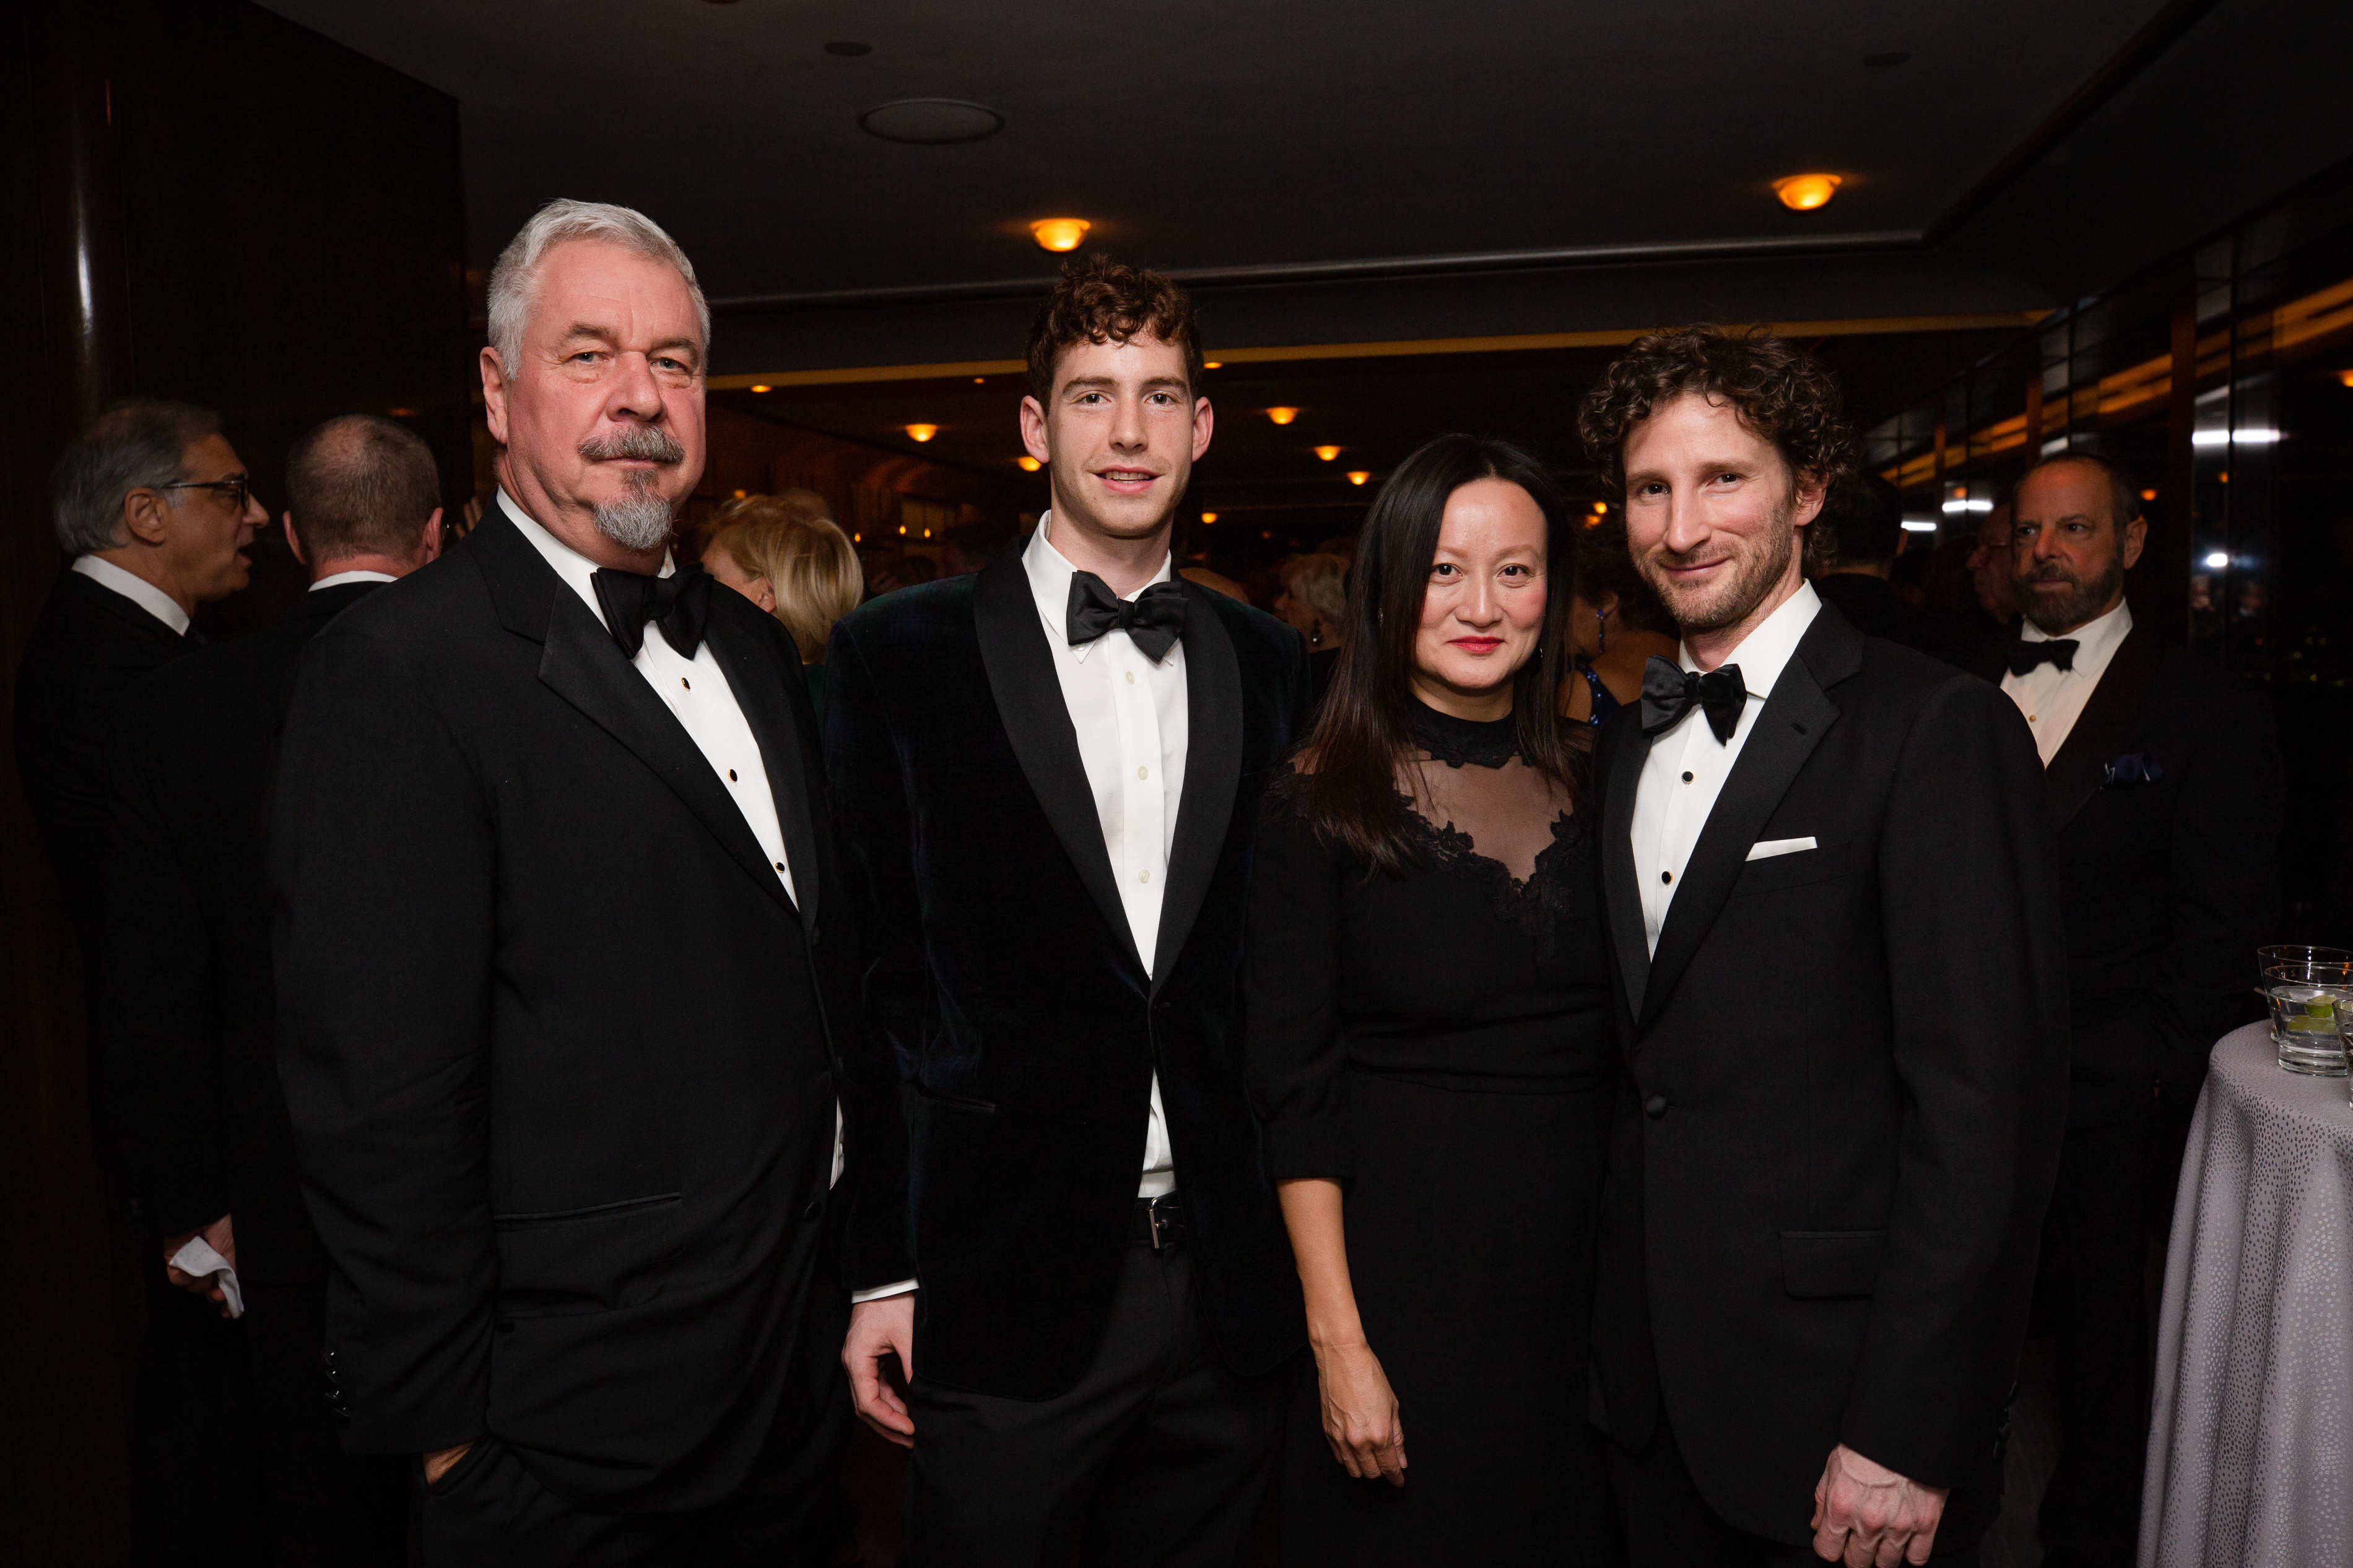 From left to right: Jack Shear, Alex Boller, Jacqueline Tran, Sean Ryan